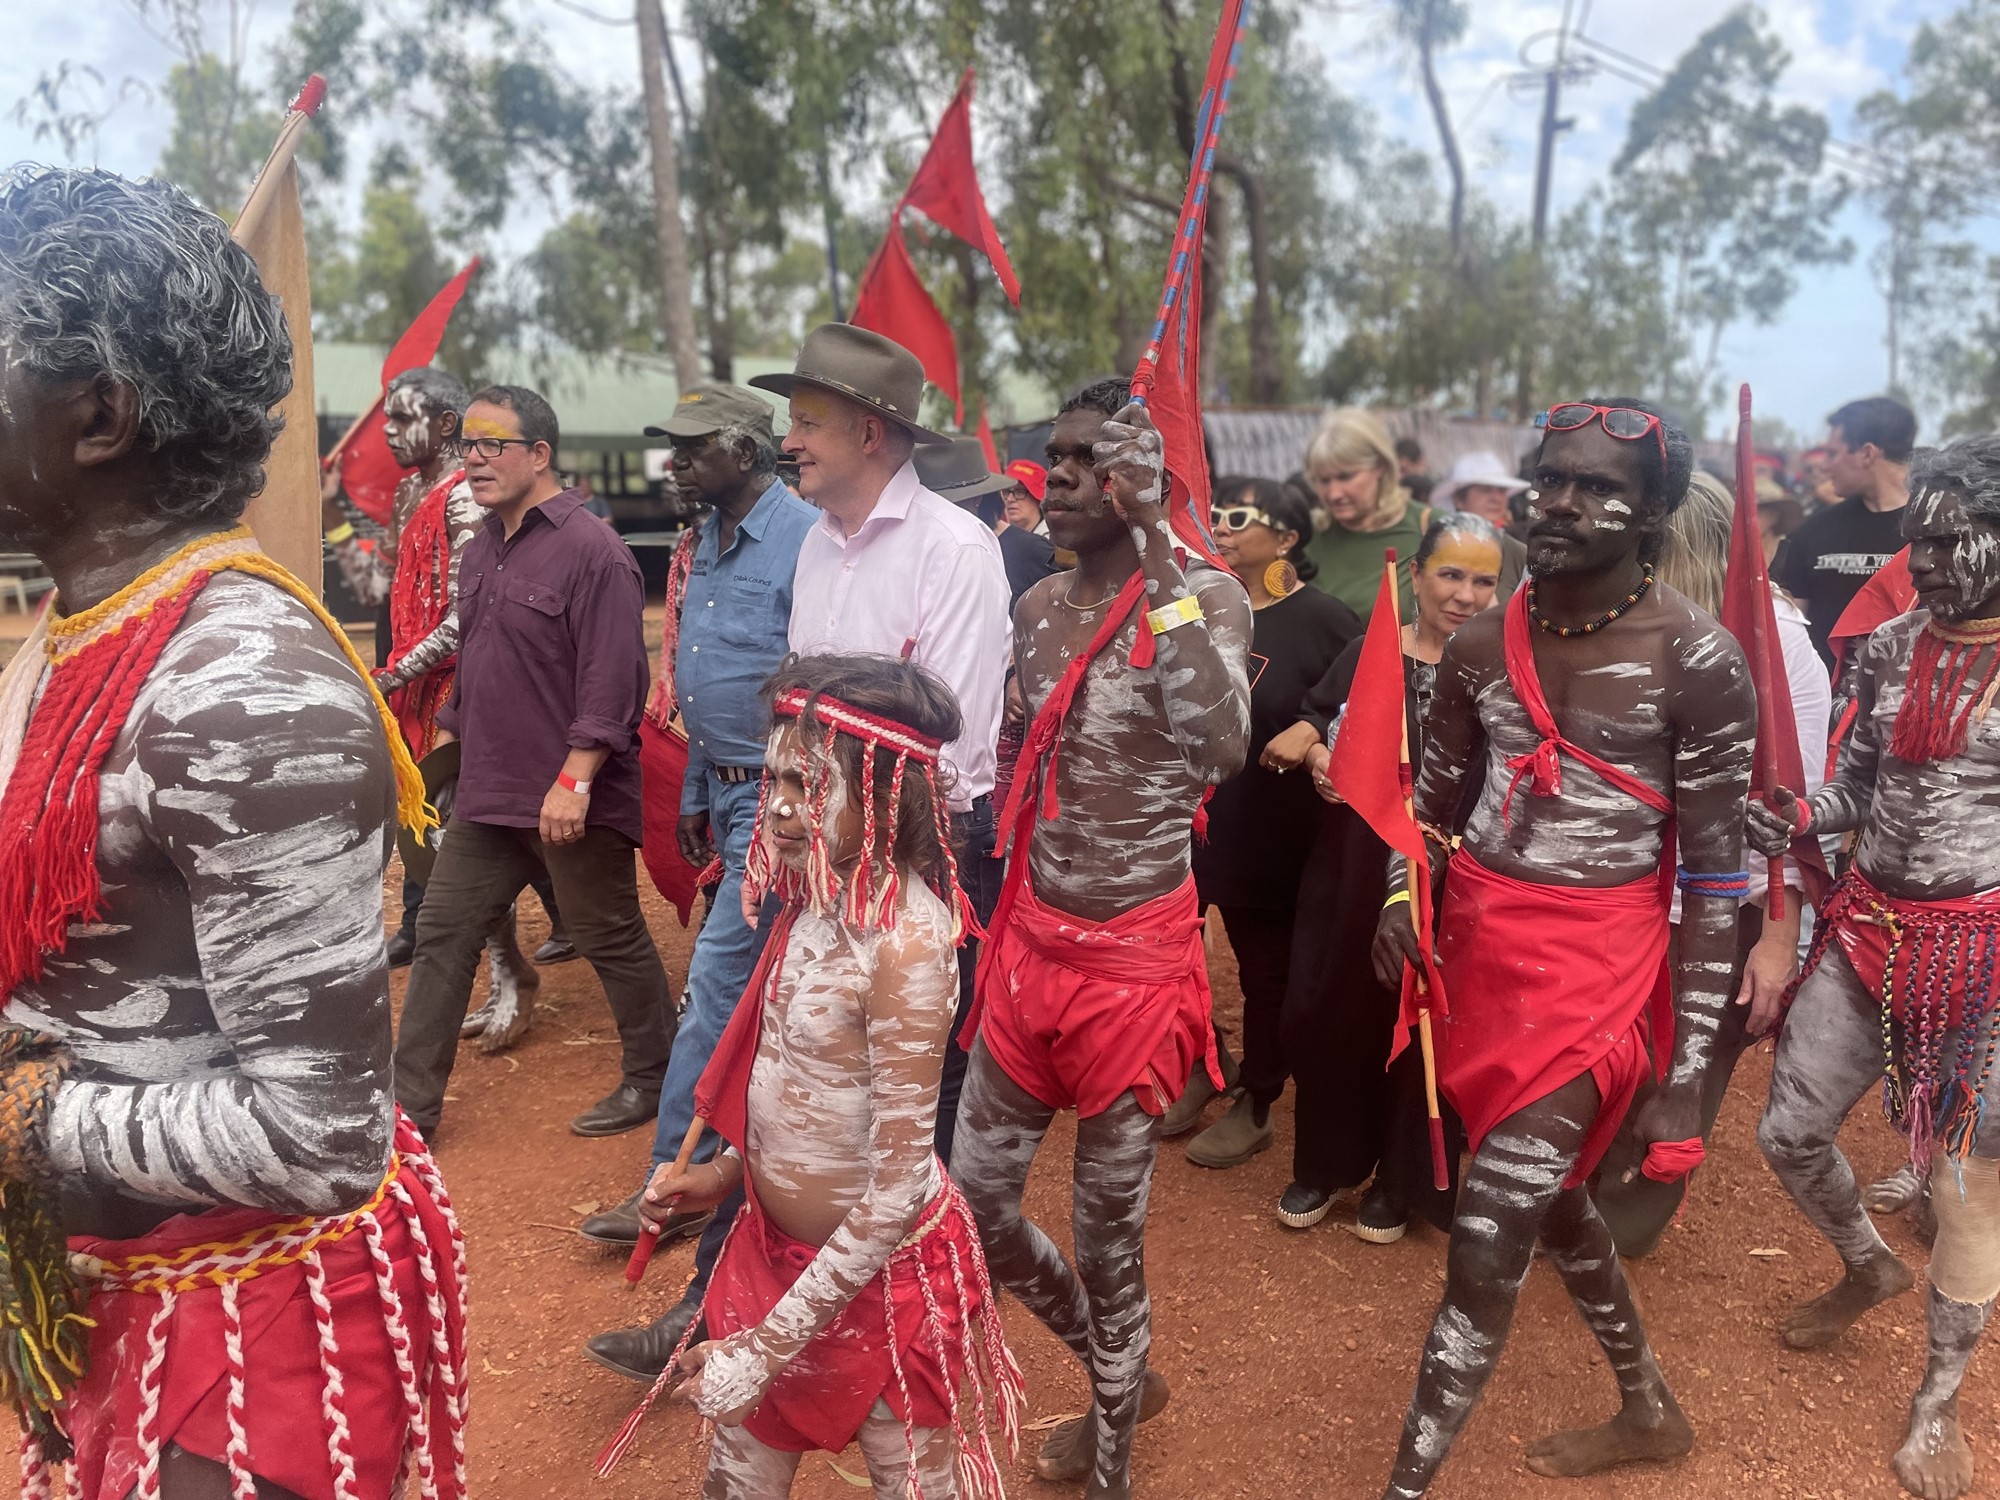 Prime Minister Anthony albanese walks in a crowd of indigenous men in traditional dress